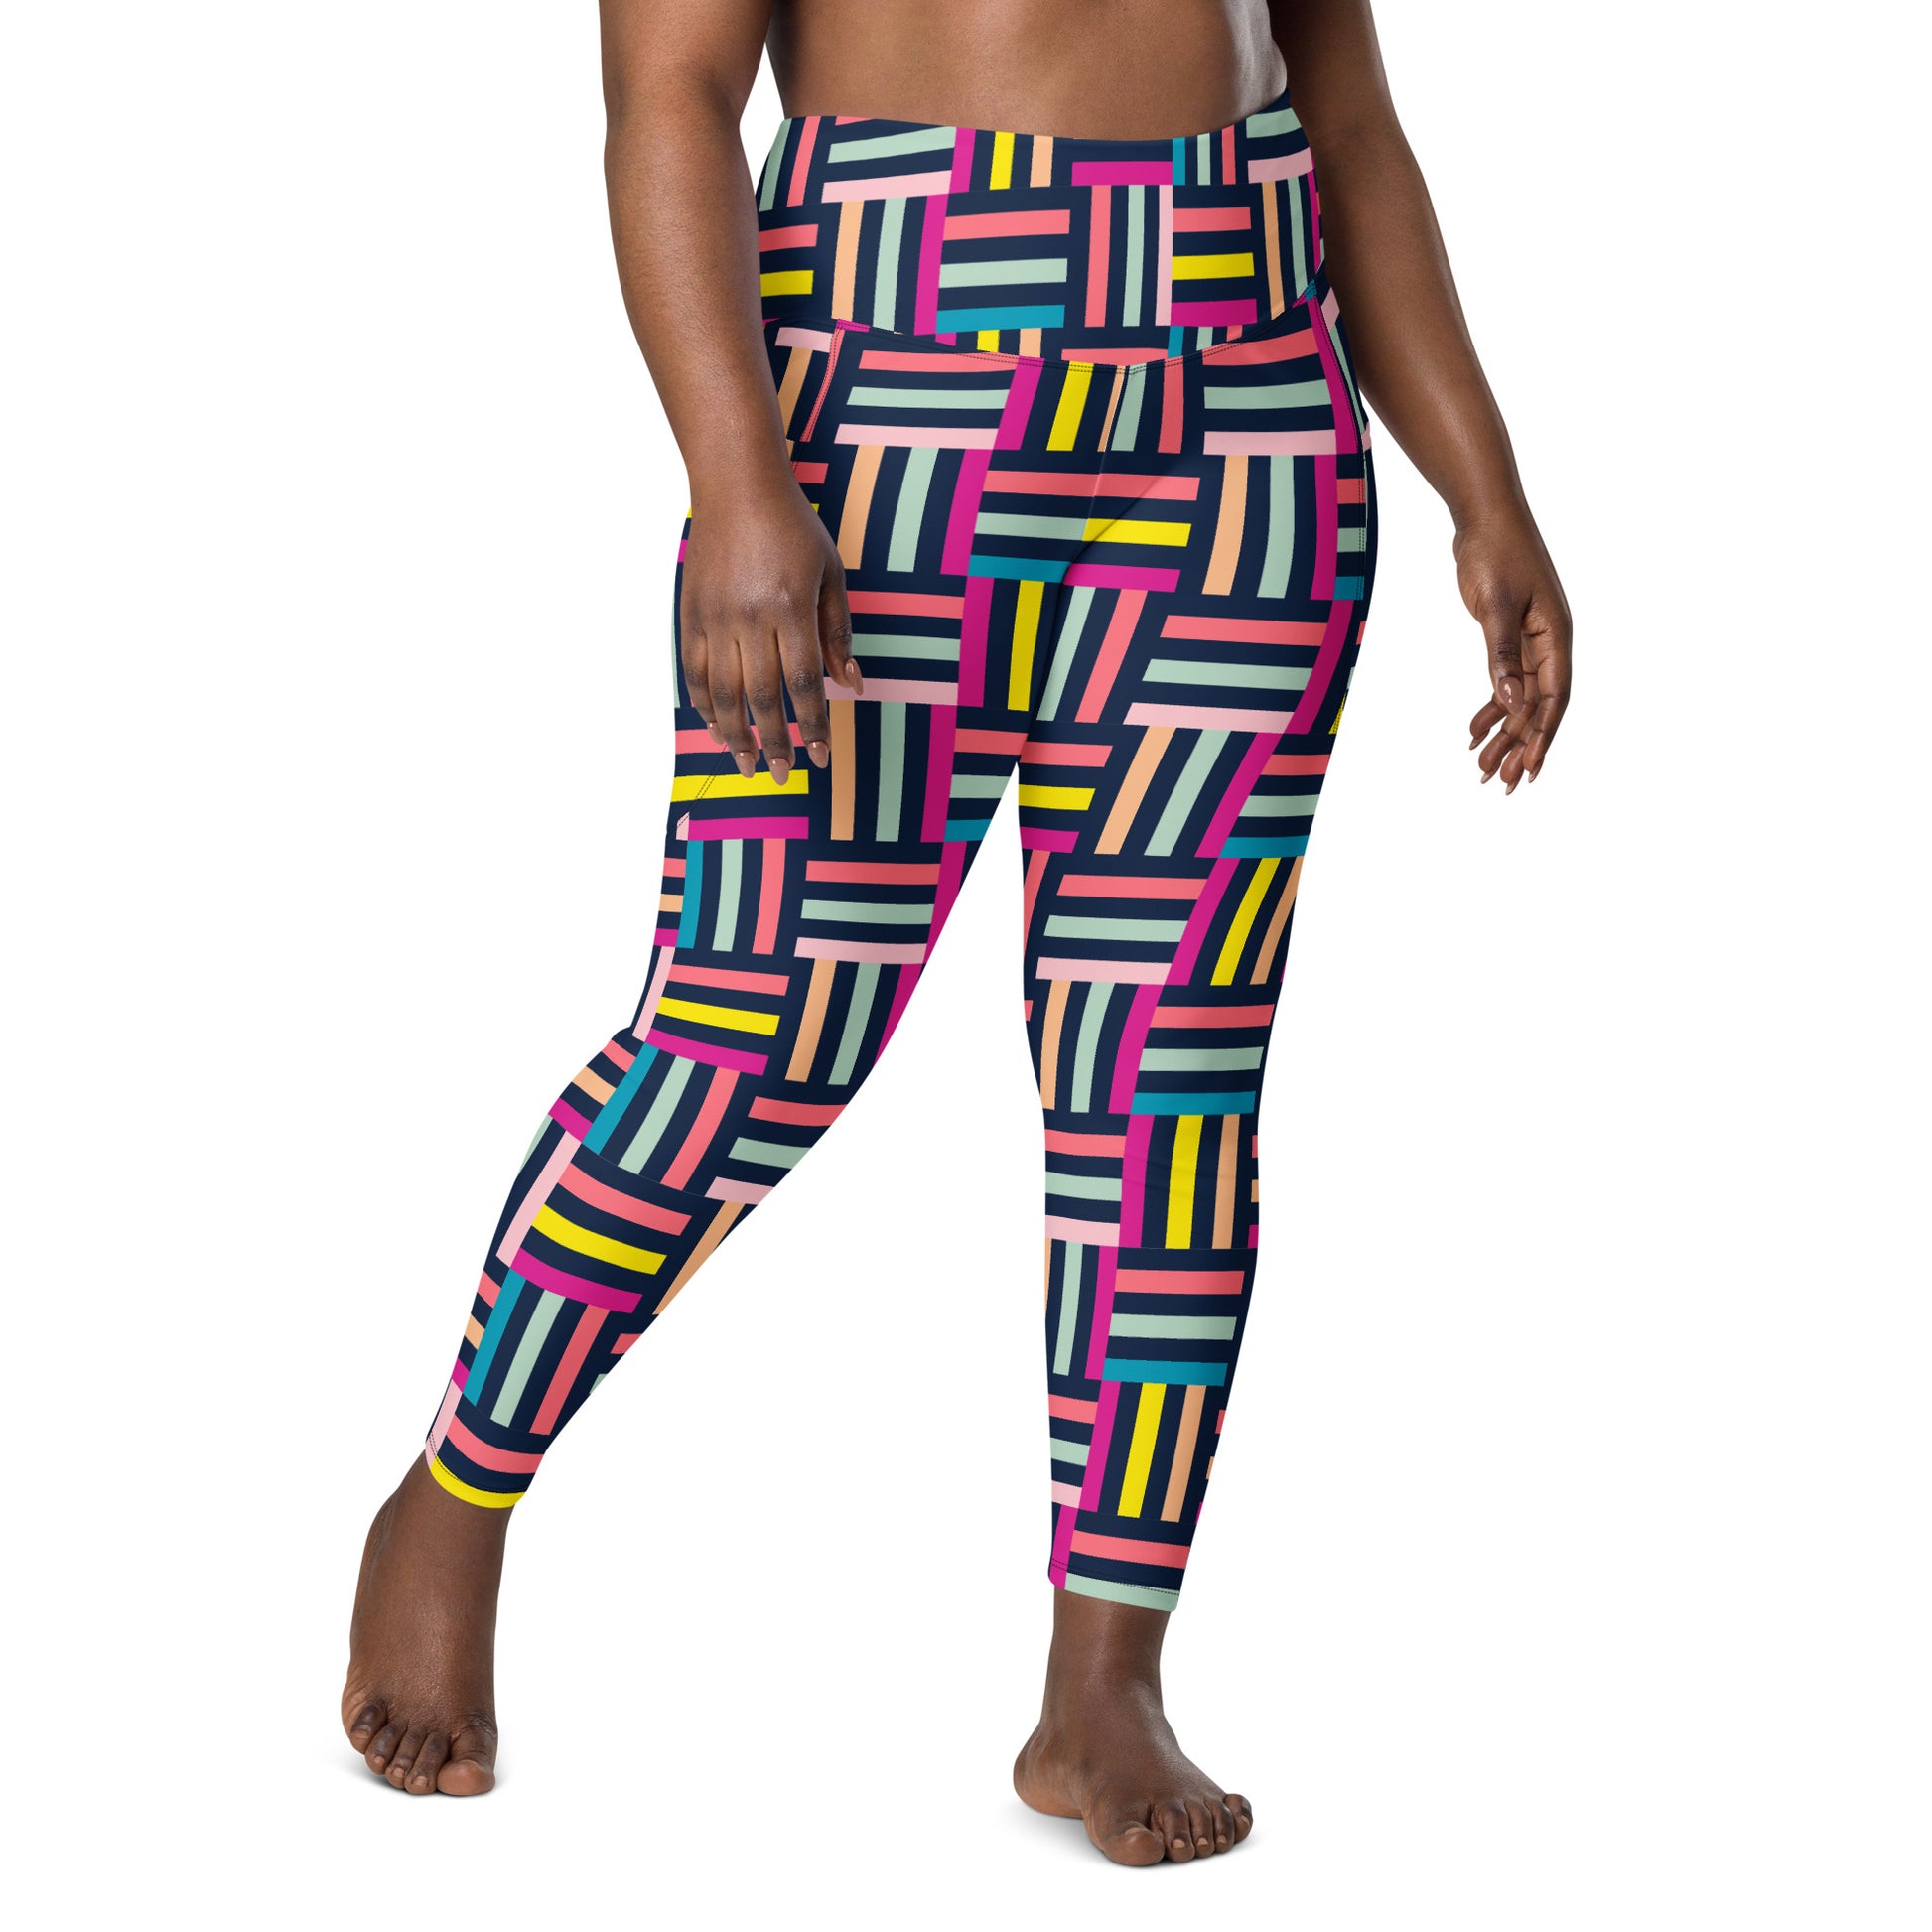 Allsorts - Leggings with pockets, 2XS - 6XL Leggings With Pockets 2XS - 6XL (US)